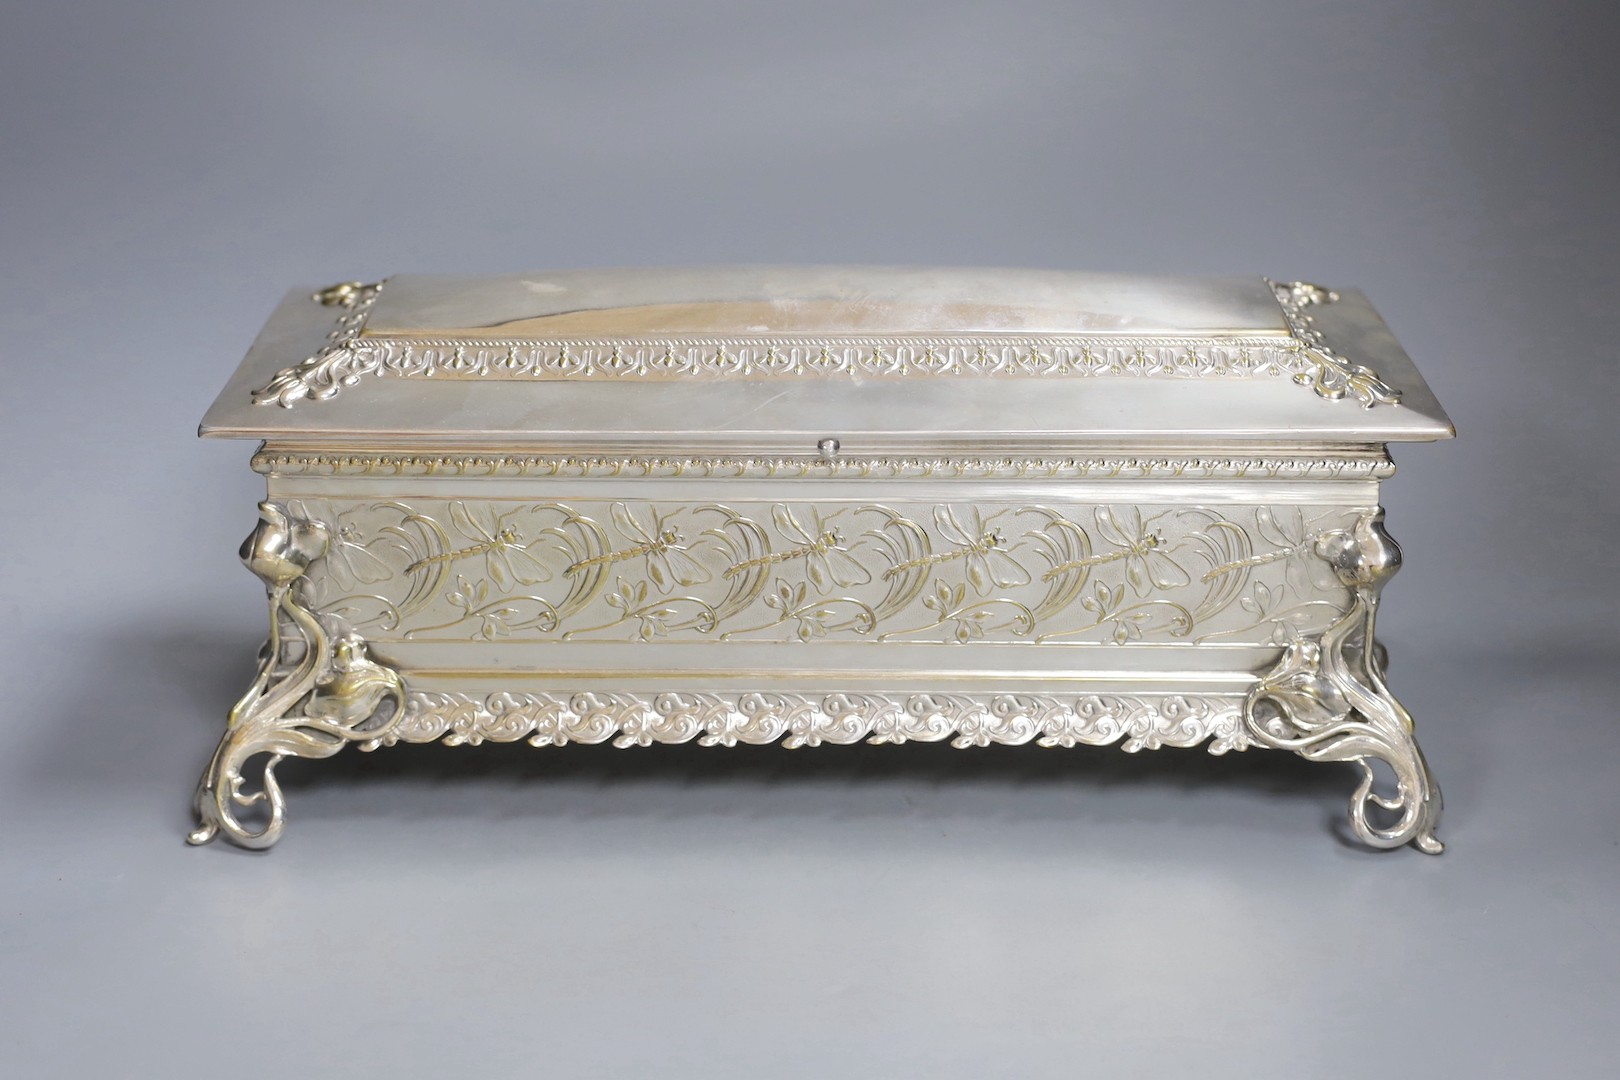 Large WMF plated presentation box, with pleated and buttoned turquoise satin interior, 39 cms wide x 15.5 cms high.